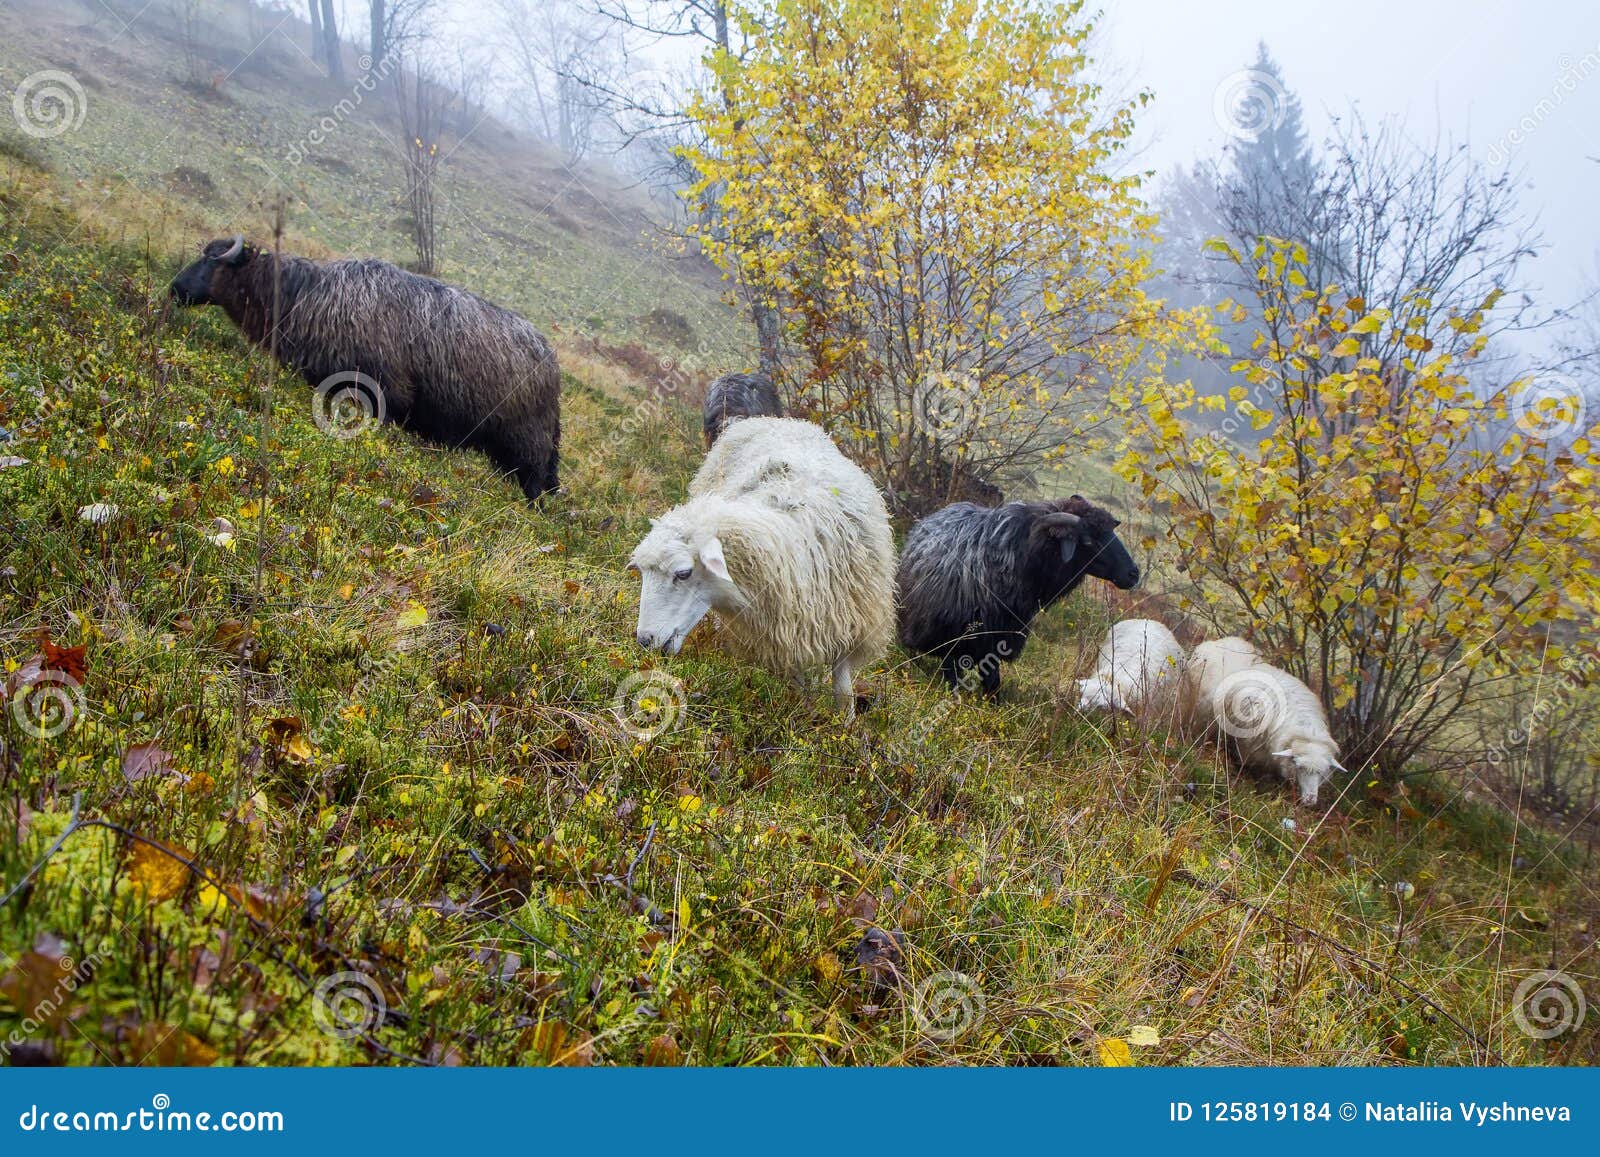 sheep graze in the foggy autumn forest